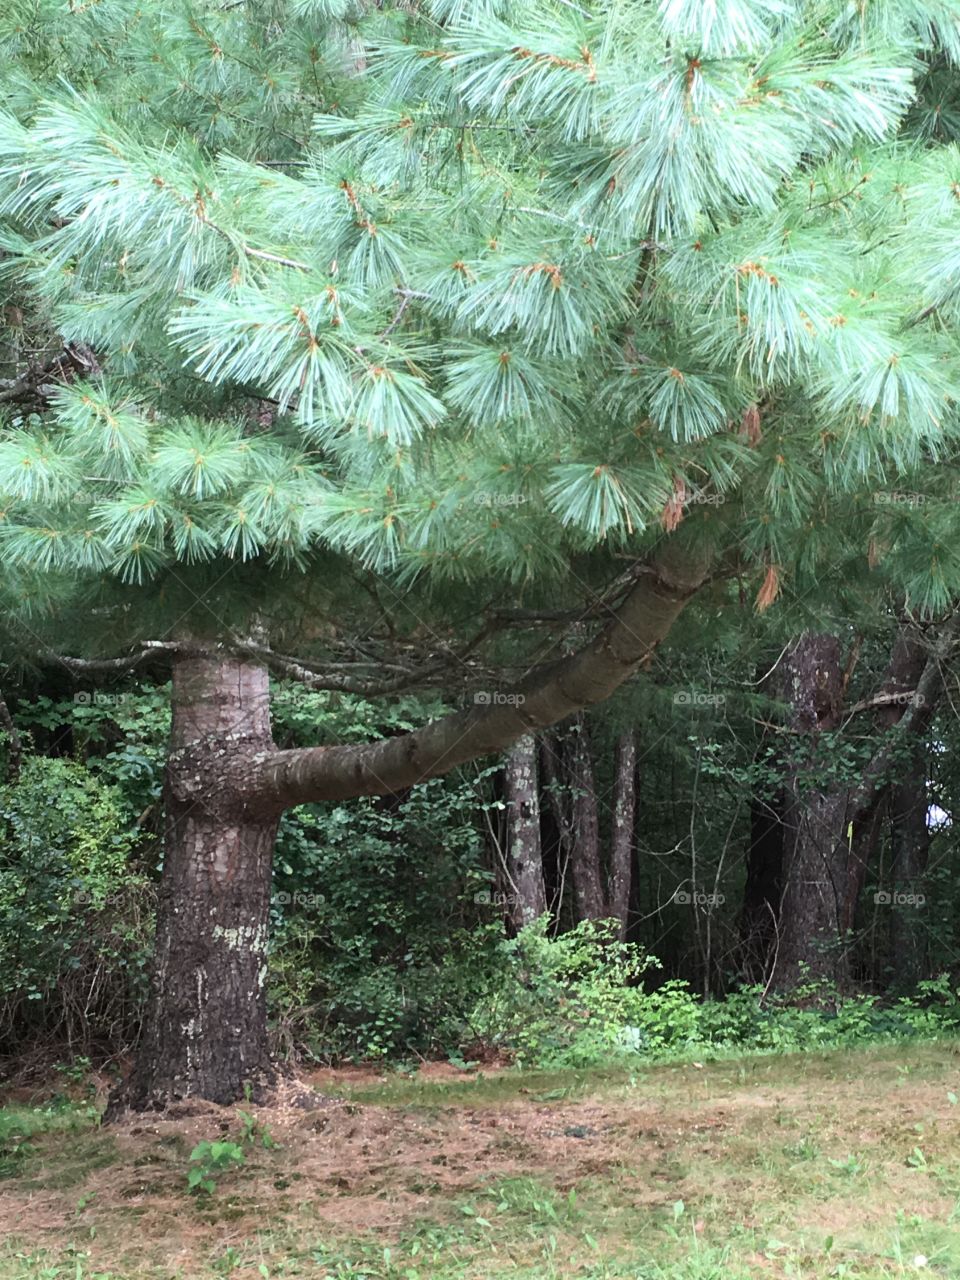 Pine Trees grow so strange in Massachusetts. Who knows where this one is going? 